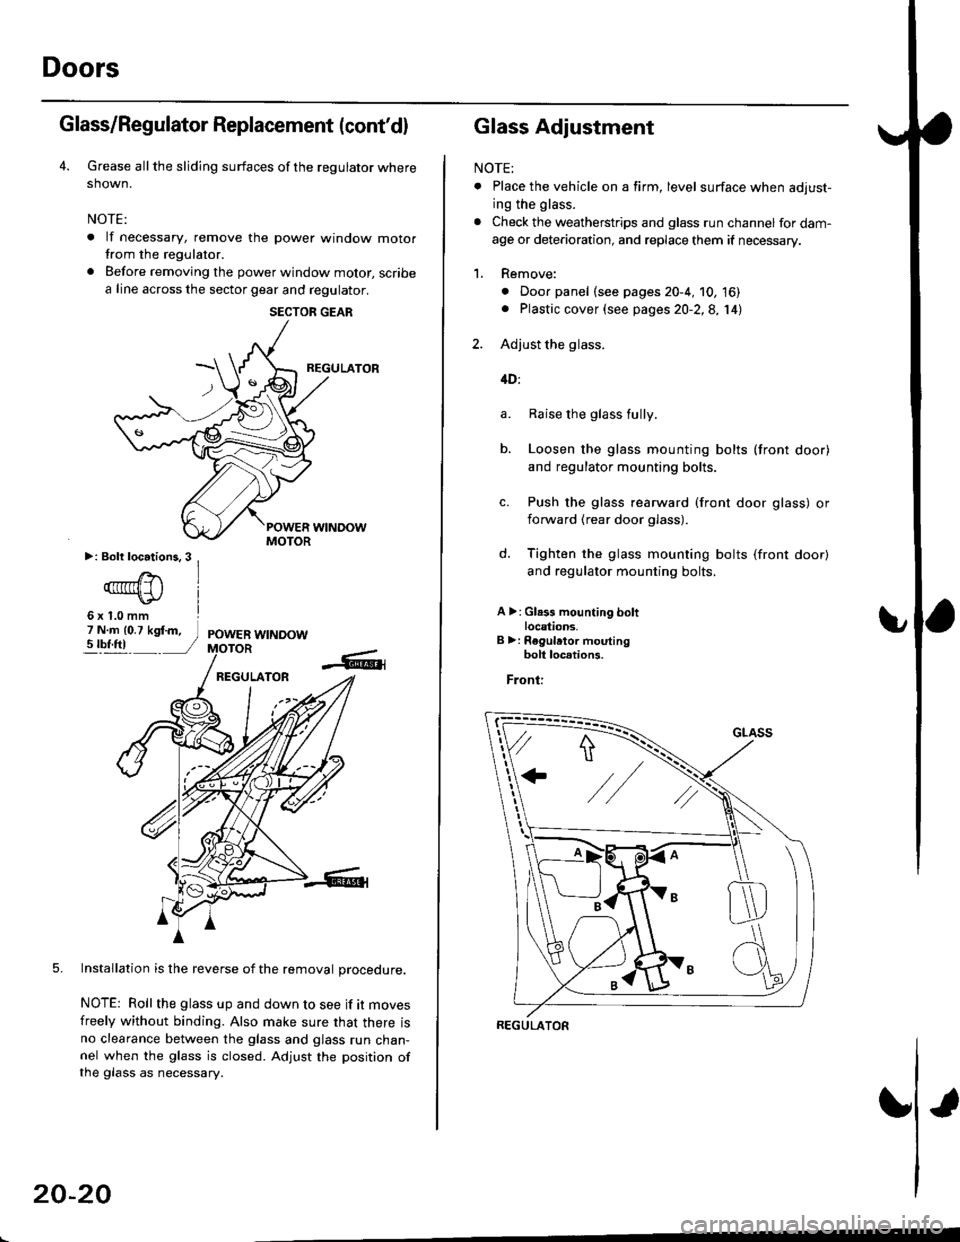 HONDA CIVIC 1998 6.G Workshop Manual Doors
Glass/Regulator Replacement (contdl
Grease all the sliding surfaces of the regulator where
shown.
NOTE:
. lf necessary, remove the power window motorfrom the regulator.
. Before removing the po